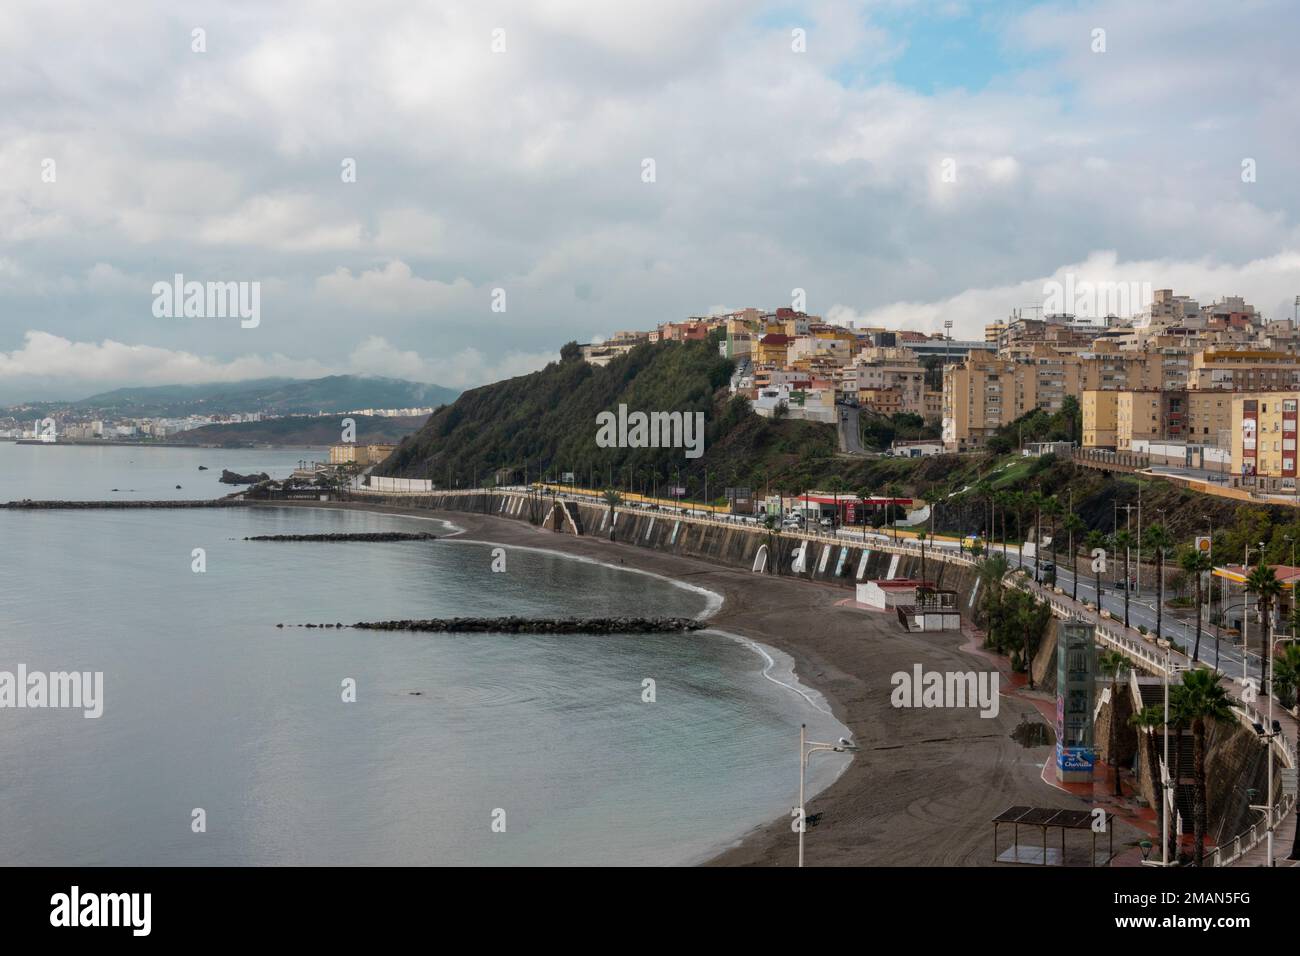 Ceuta, Spain - December 04, 2022: View of the beaches of Ceuta, a Spanish city in North Africa. Stock Photo